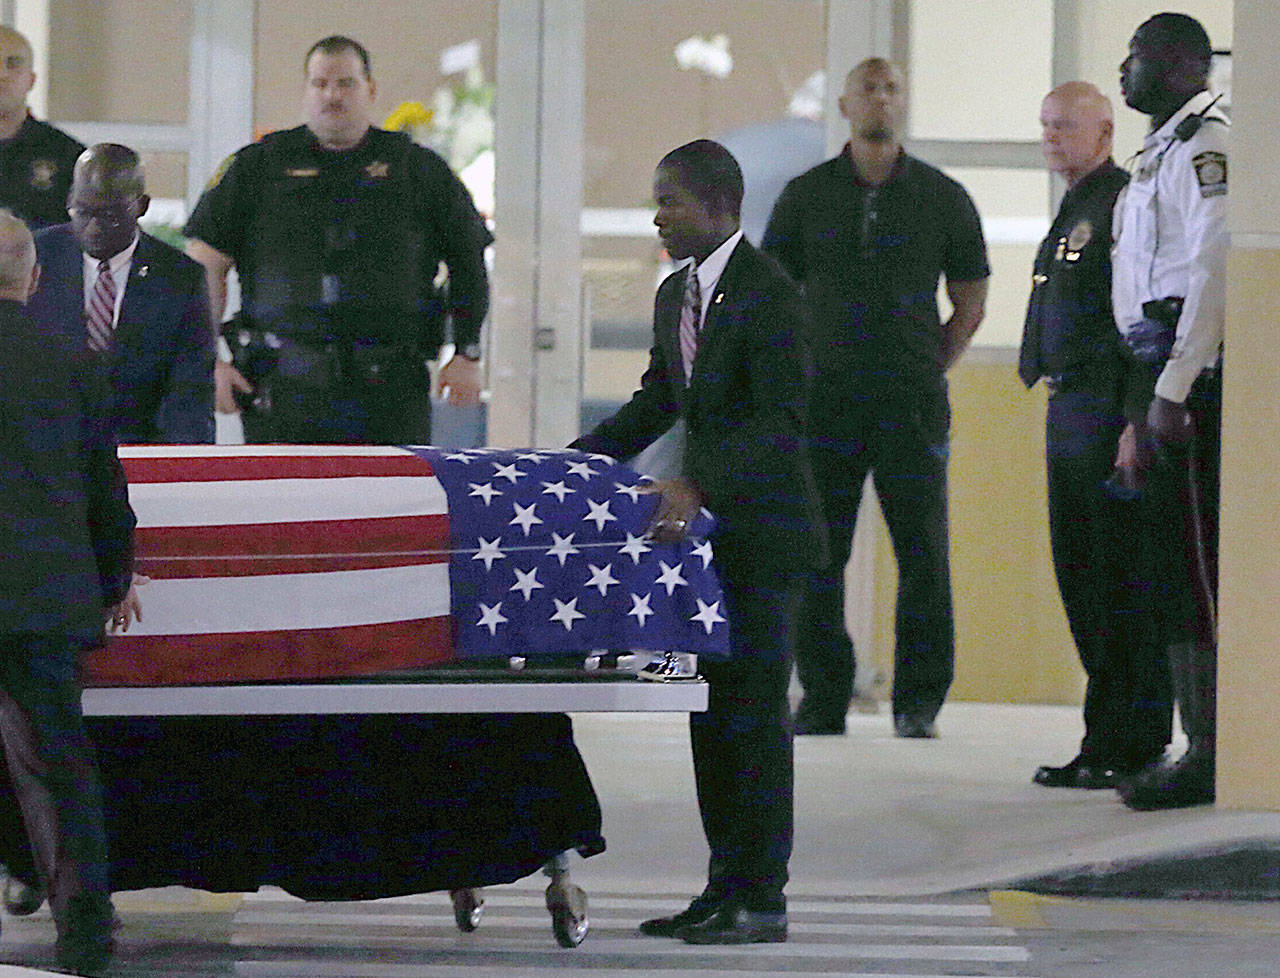 The casket of Sgt. La David T. Johnson of Miami Gardens, who was killed in an ambush in Niger, is wheeled out after a viewing at the Christ The Rock Church, Friday, Oct. 20, 2017 in Cooper City, Fla. (Pedro Portal/Miami Herald via AP)